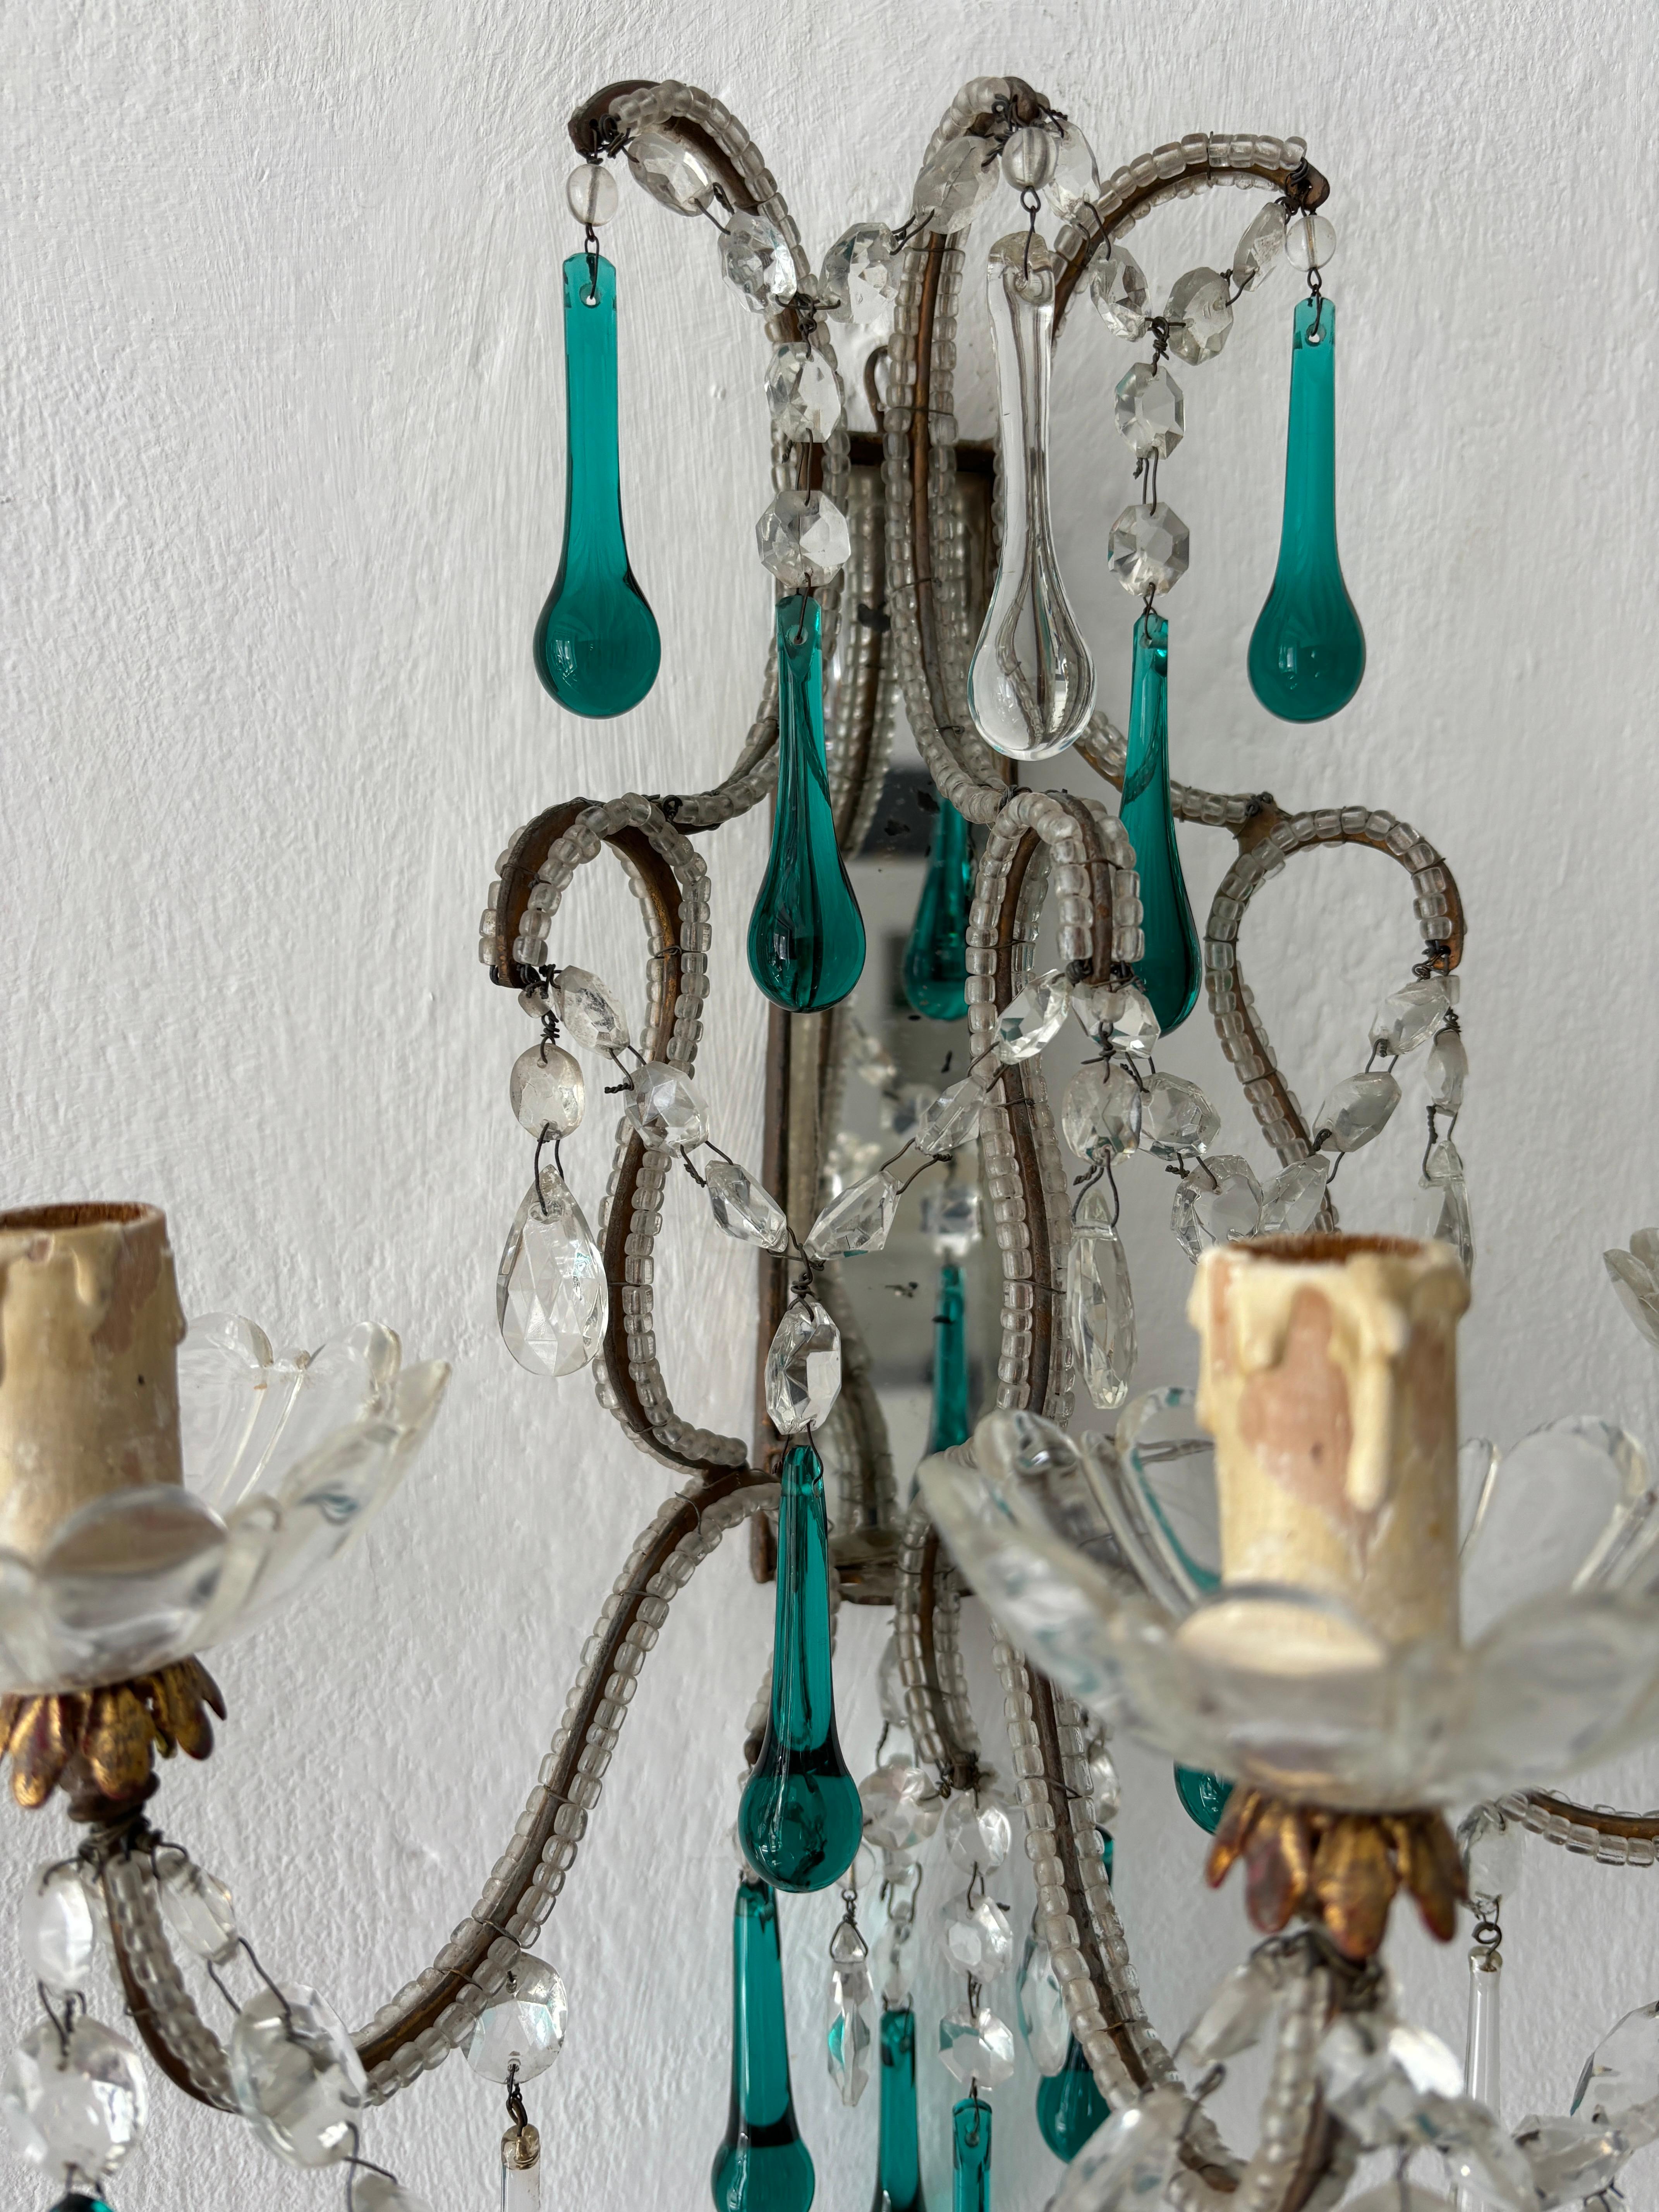 Crystal c 1900 French Beaded Extremely Rare Sea foam Green Murano Drops Mirrors Sconces For Sale